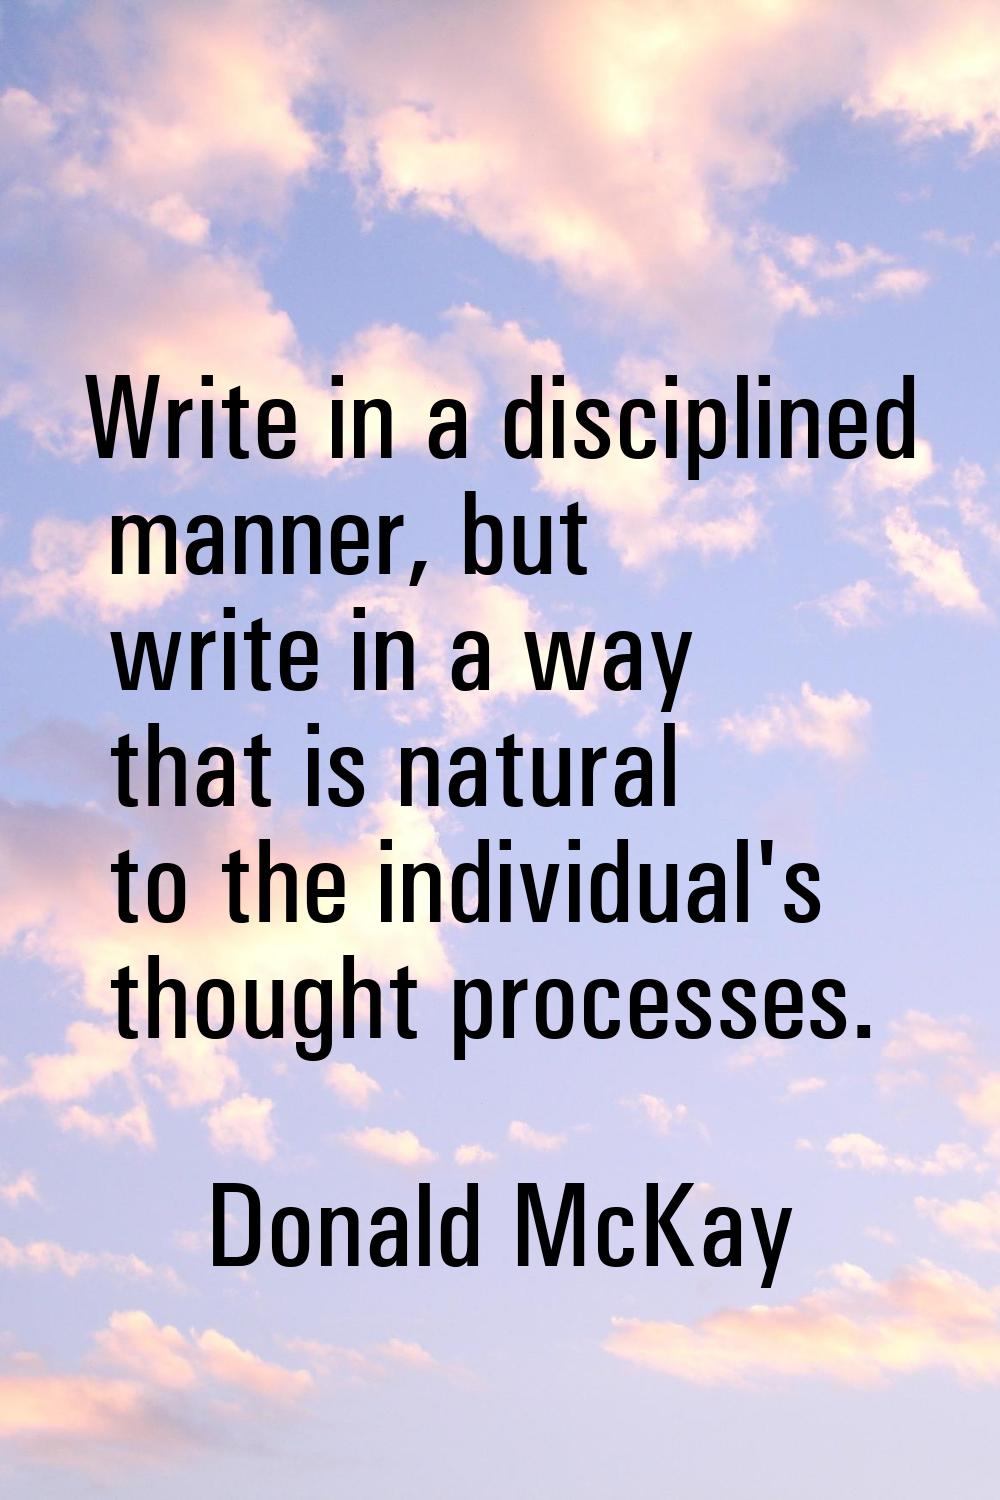 Write in a disciplined manner, but write in a way that is natural to the individual's thought proce